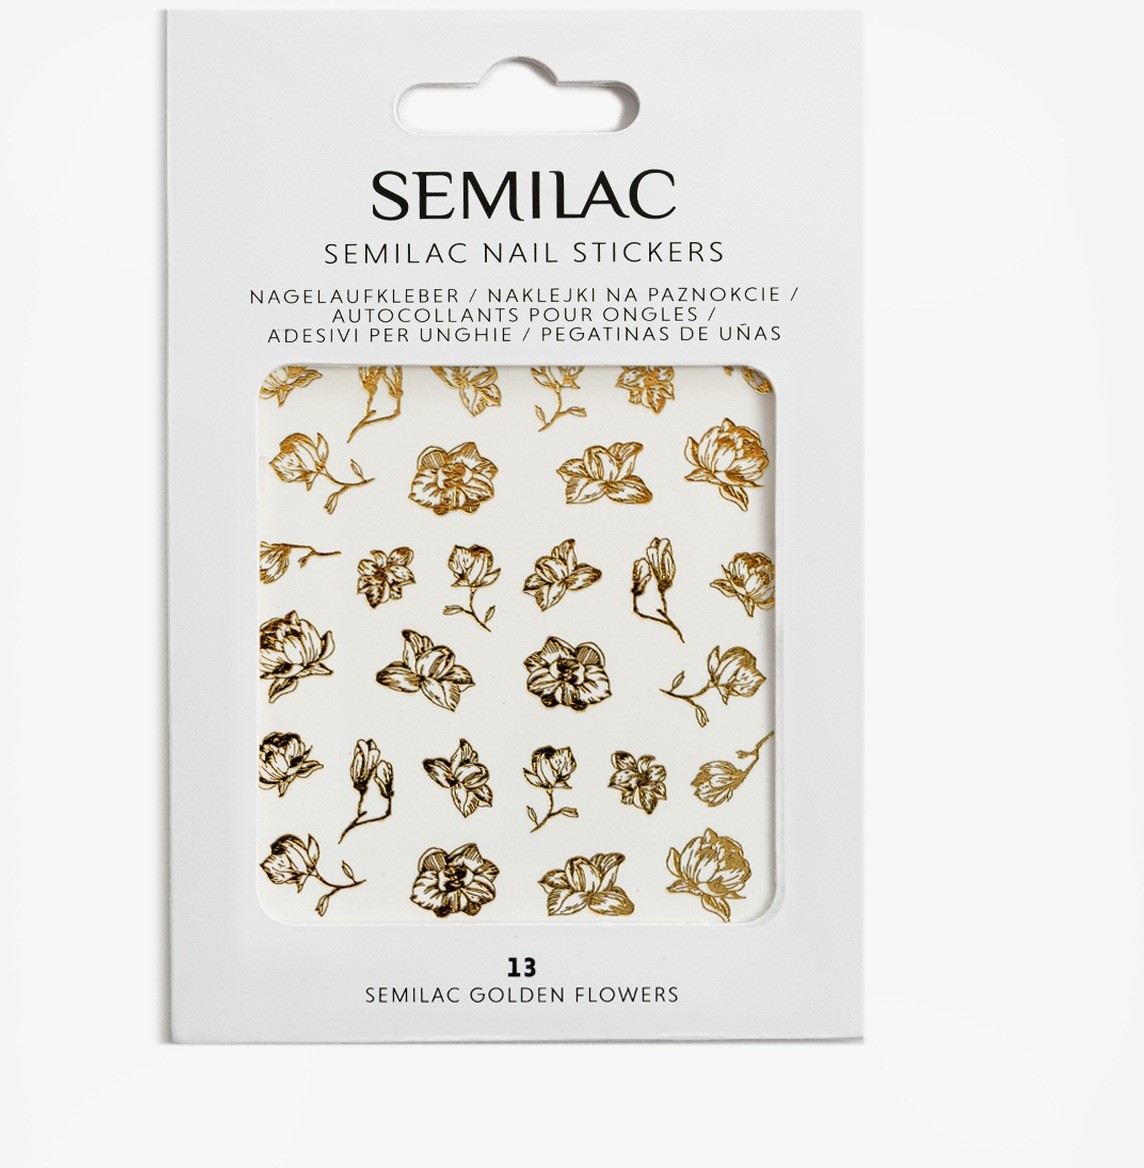 Semilac 13 Golden Flowers Nails Stickers